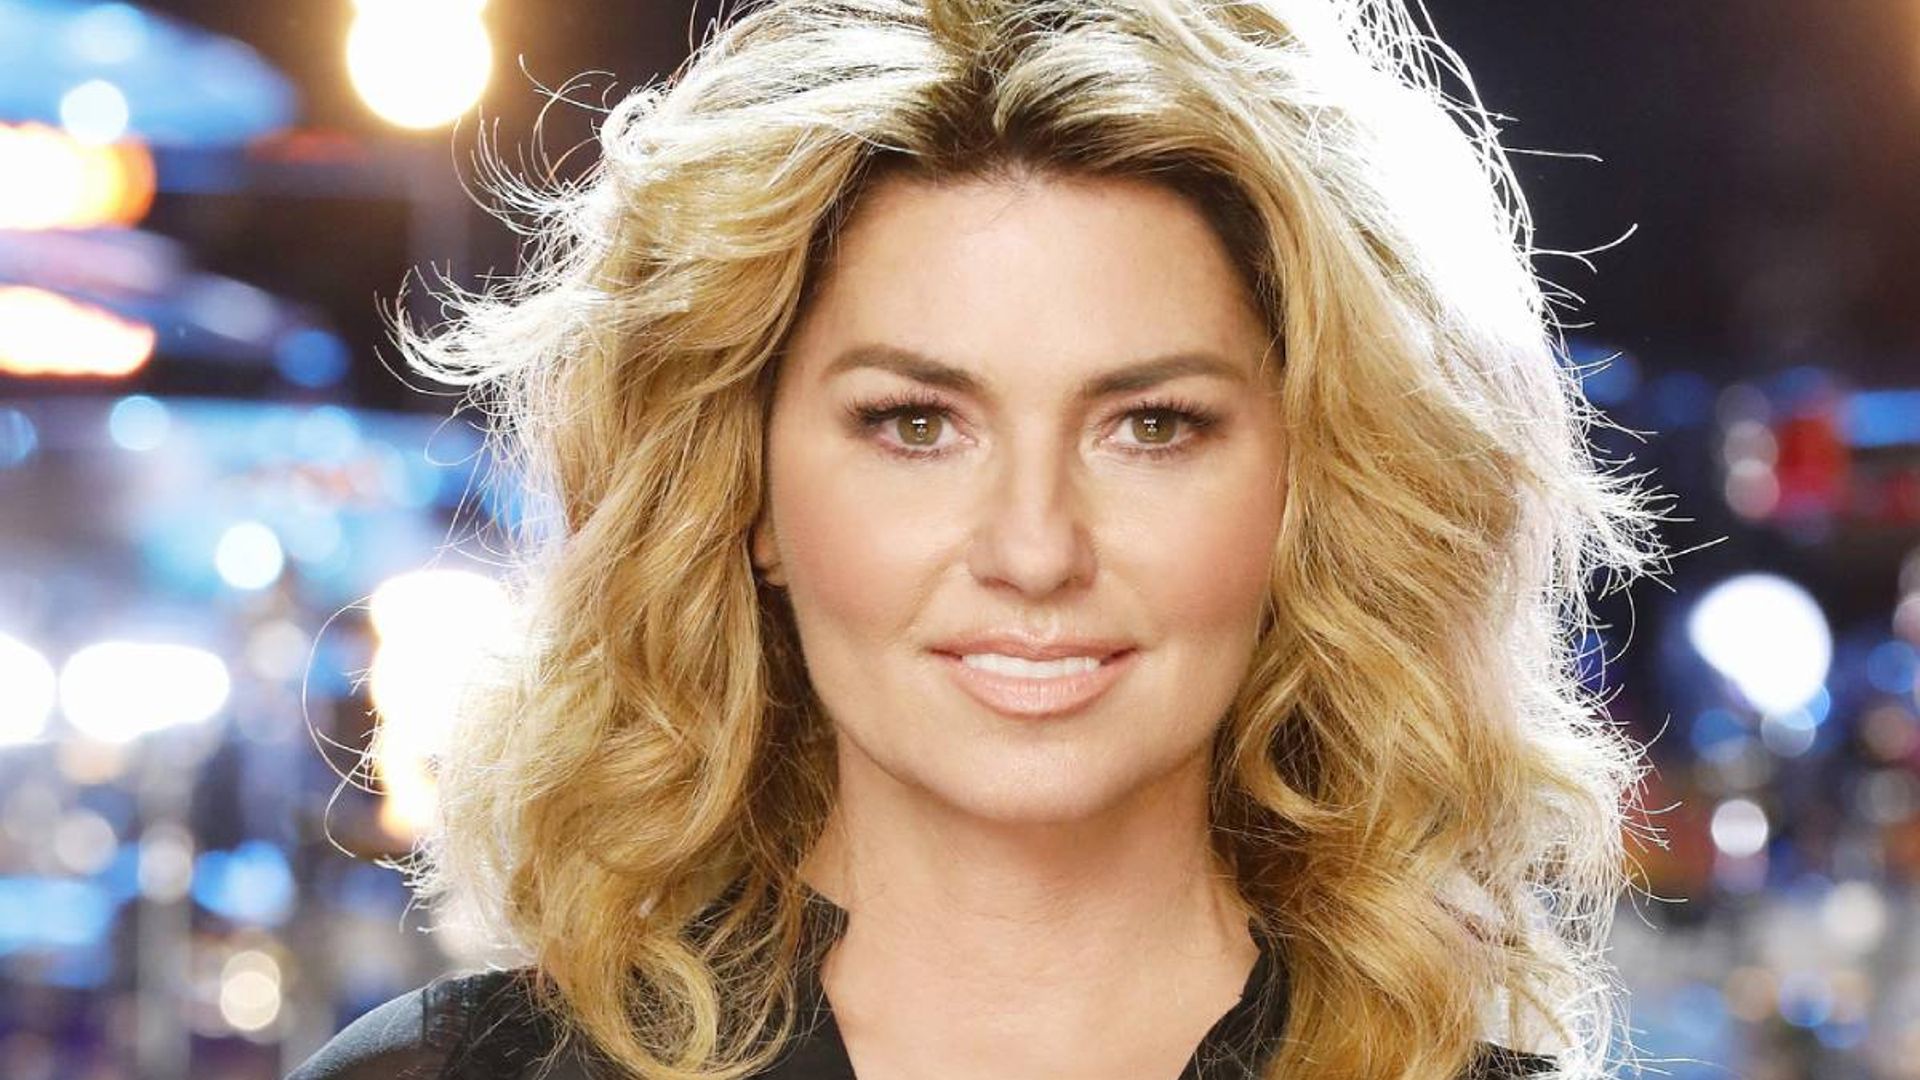 Shania Twain looks like a real life princess in metallic pink gown in celebratory stage photo